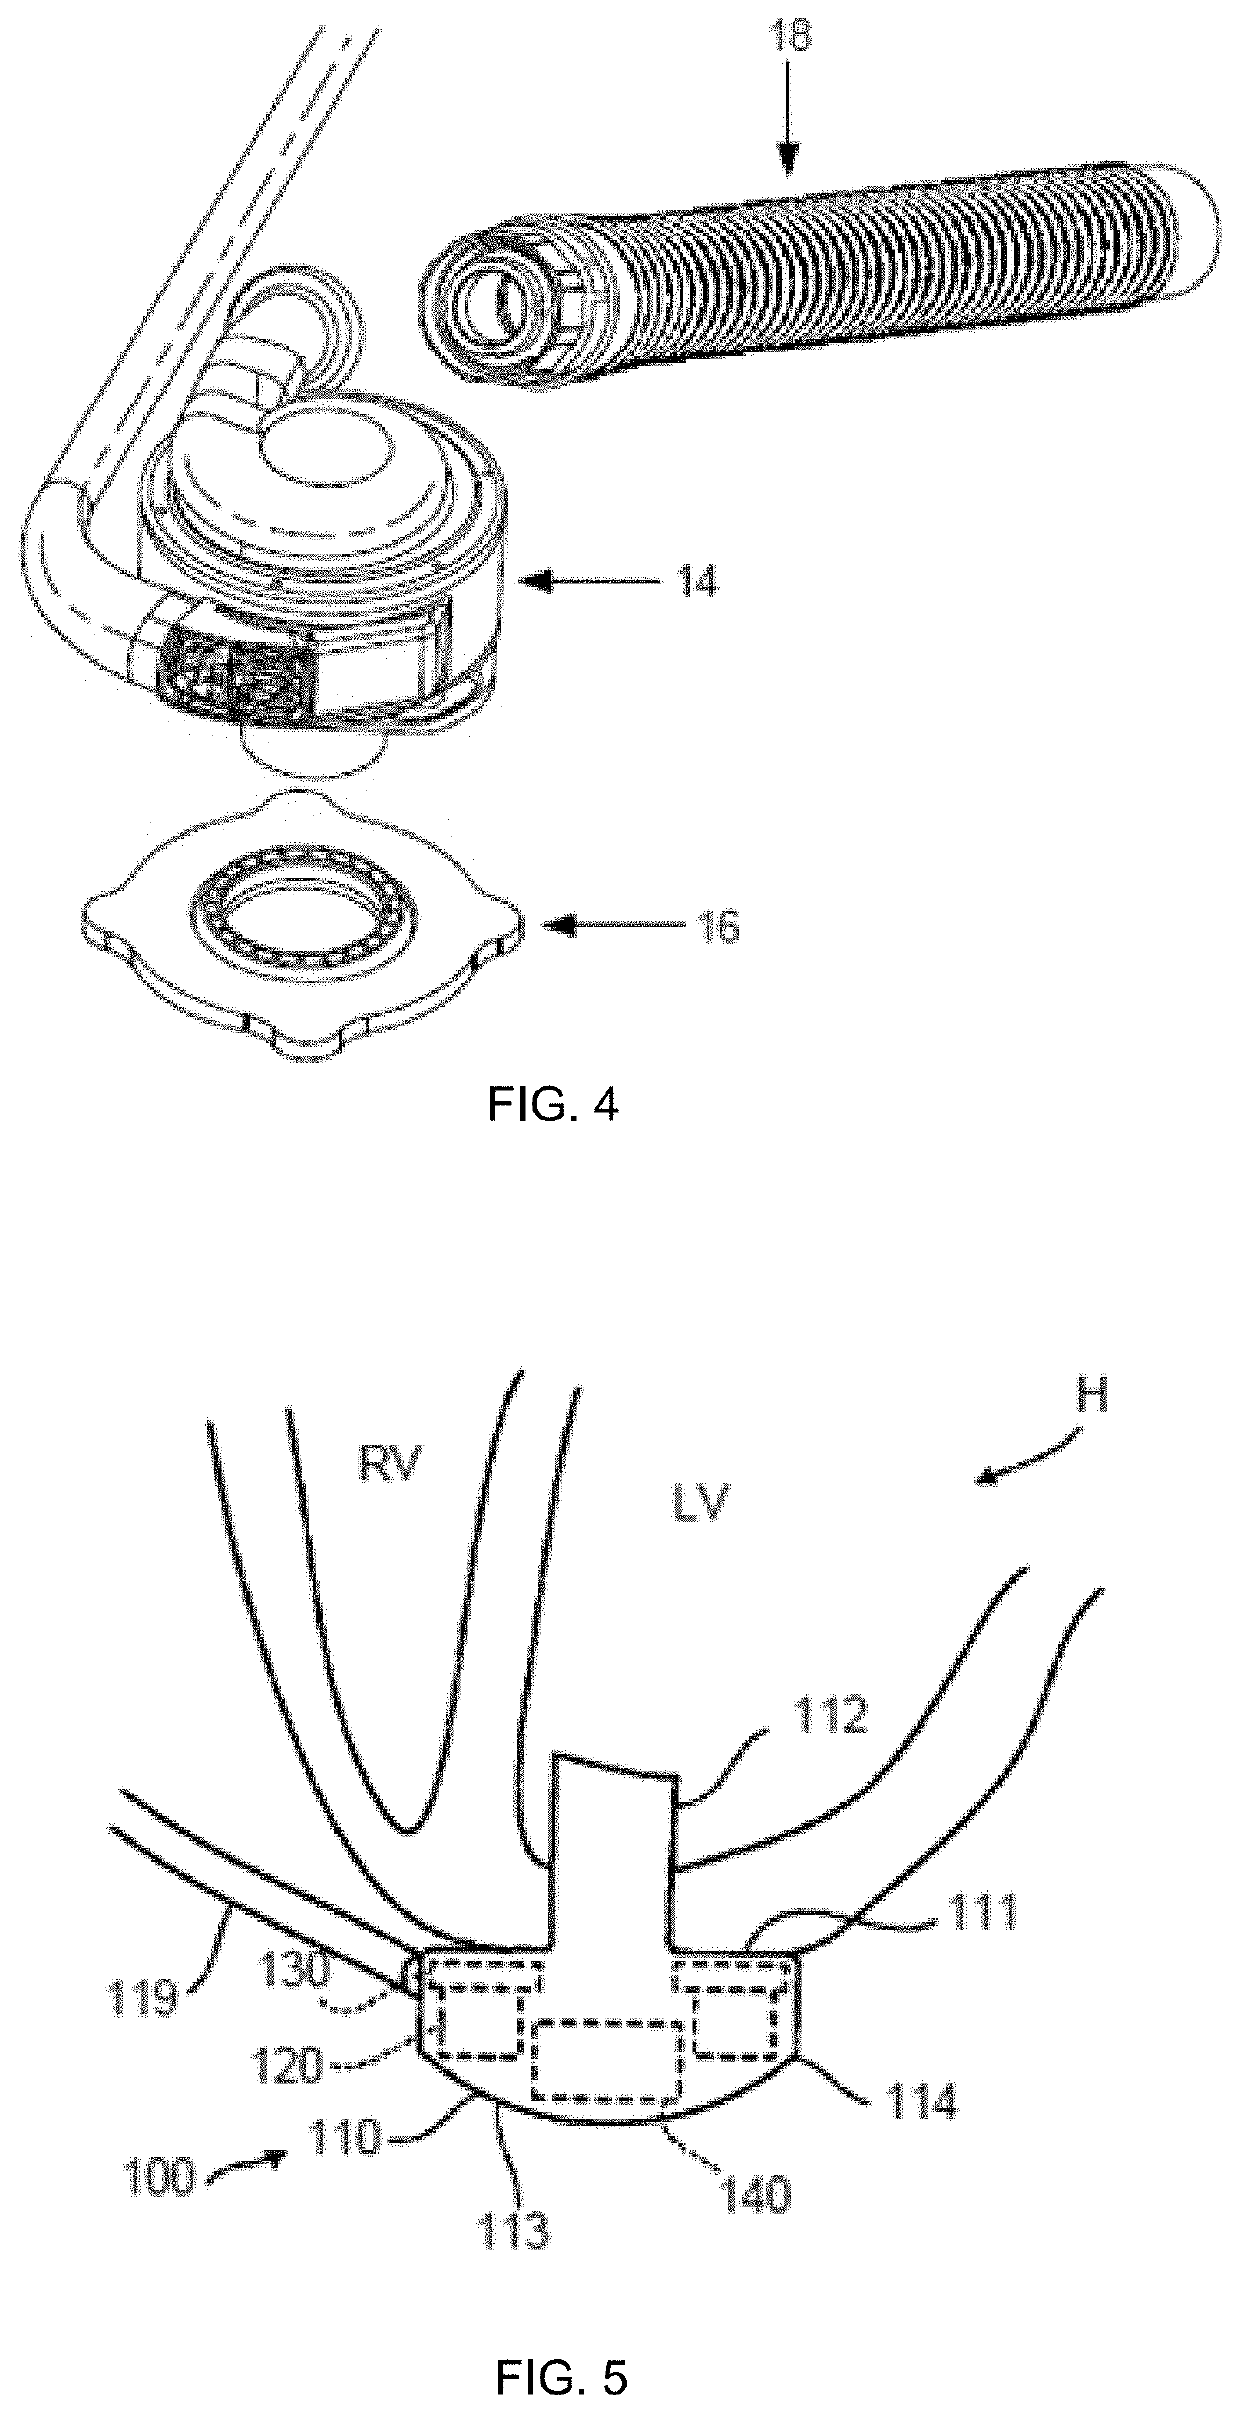 Mechanical gauge for estimating inductance changes in resonant power transfer systems with flexible coils for use with implanted medical devices